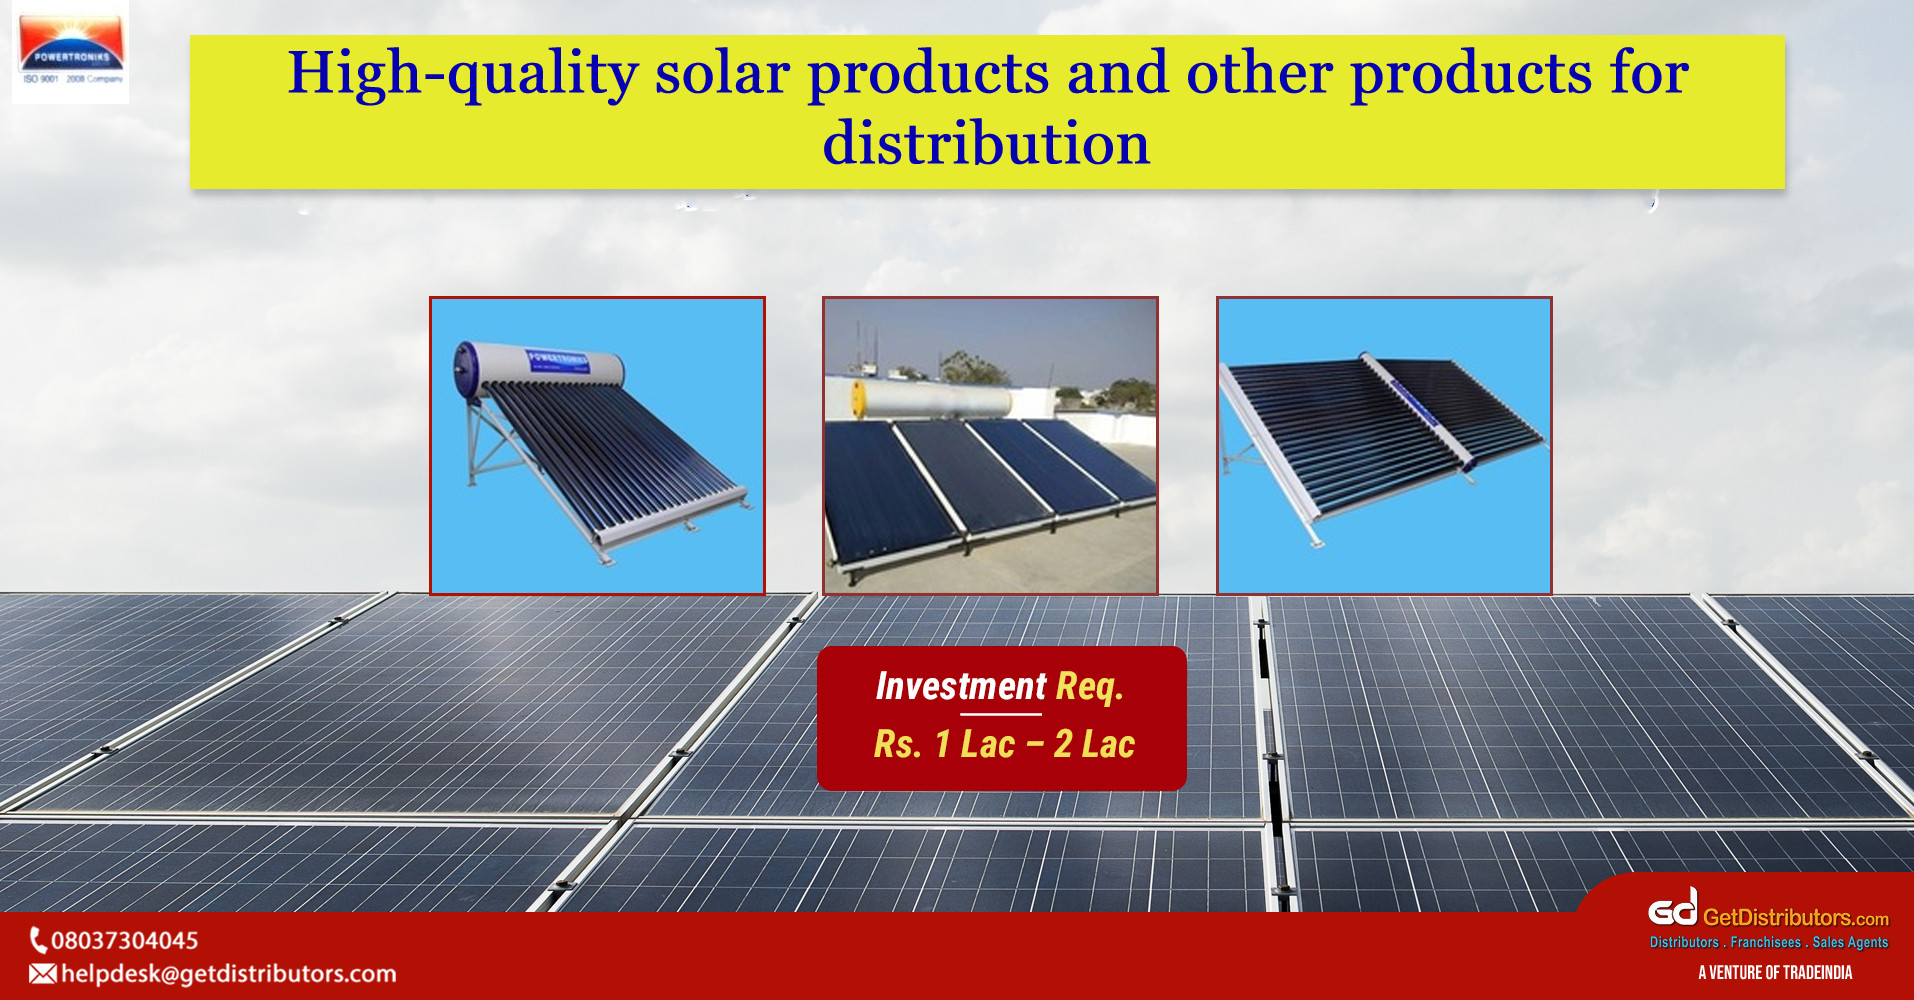 High-quality solar products and other products for distribution